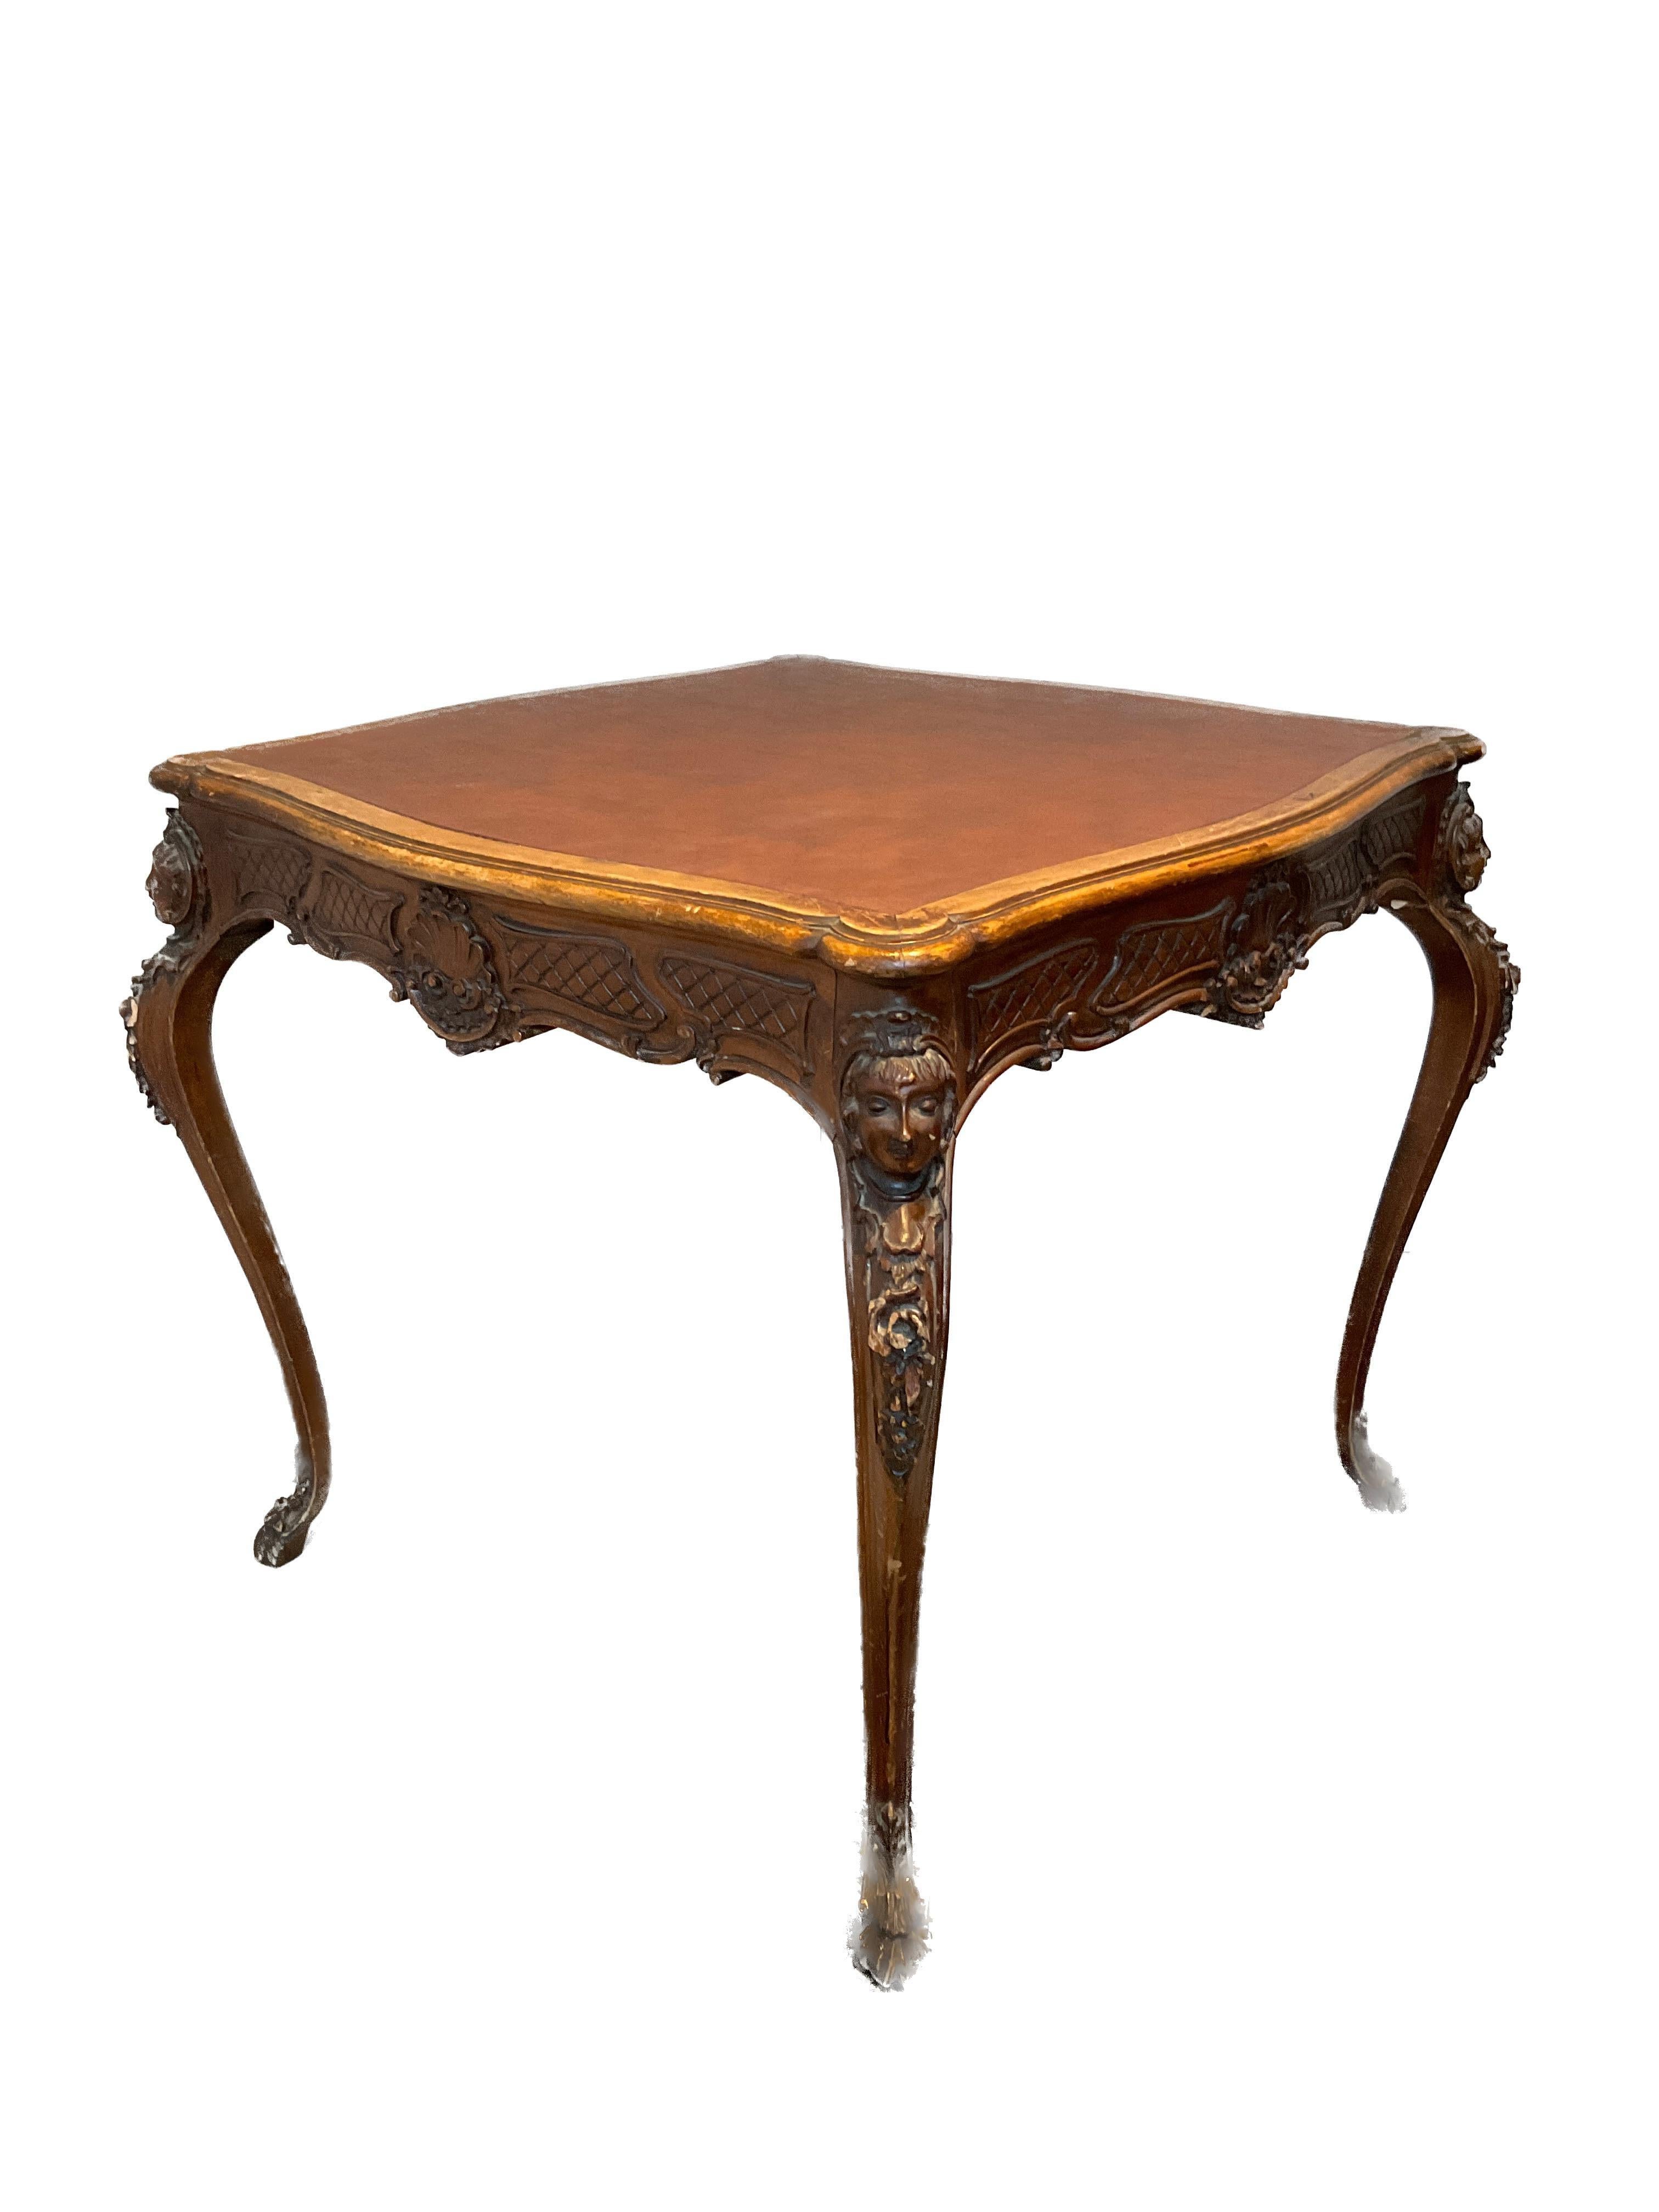 1950s Italian Carved Wood Rococo Game Table In Good Condition For Sale In Tarrytown, NY